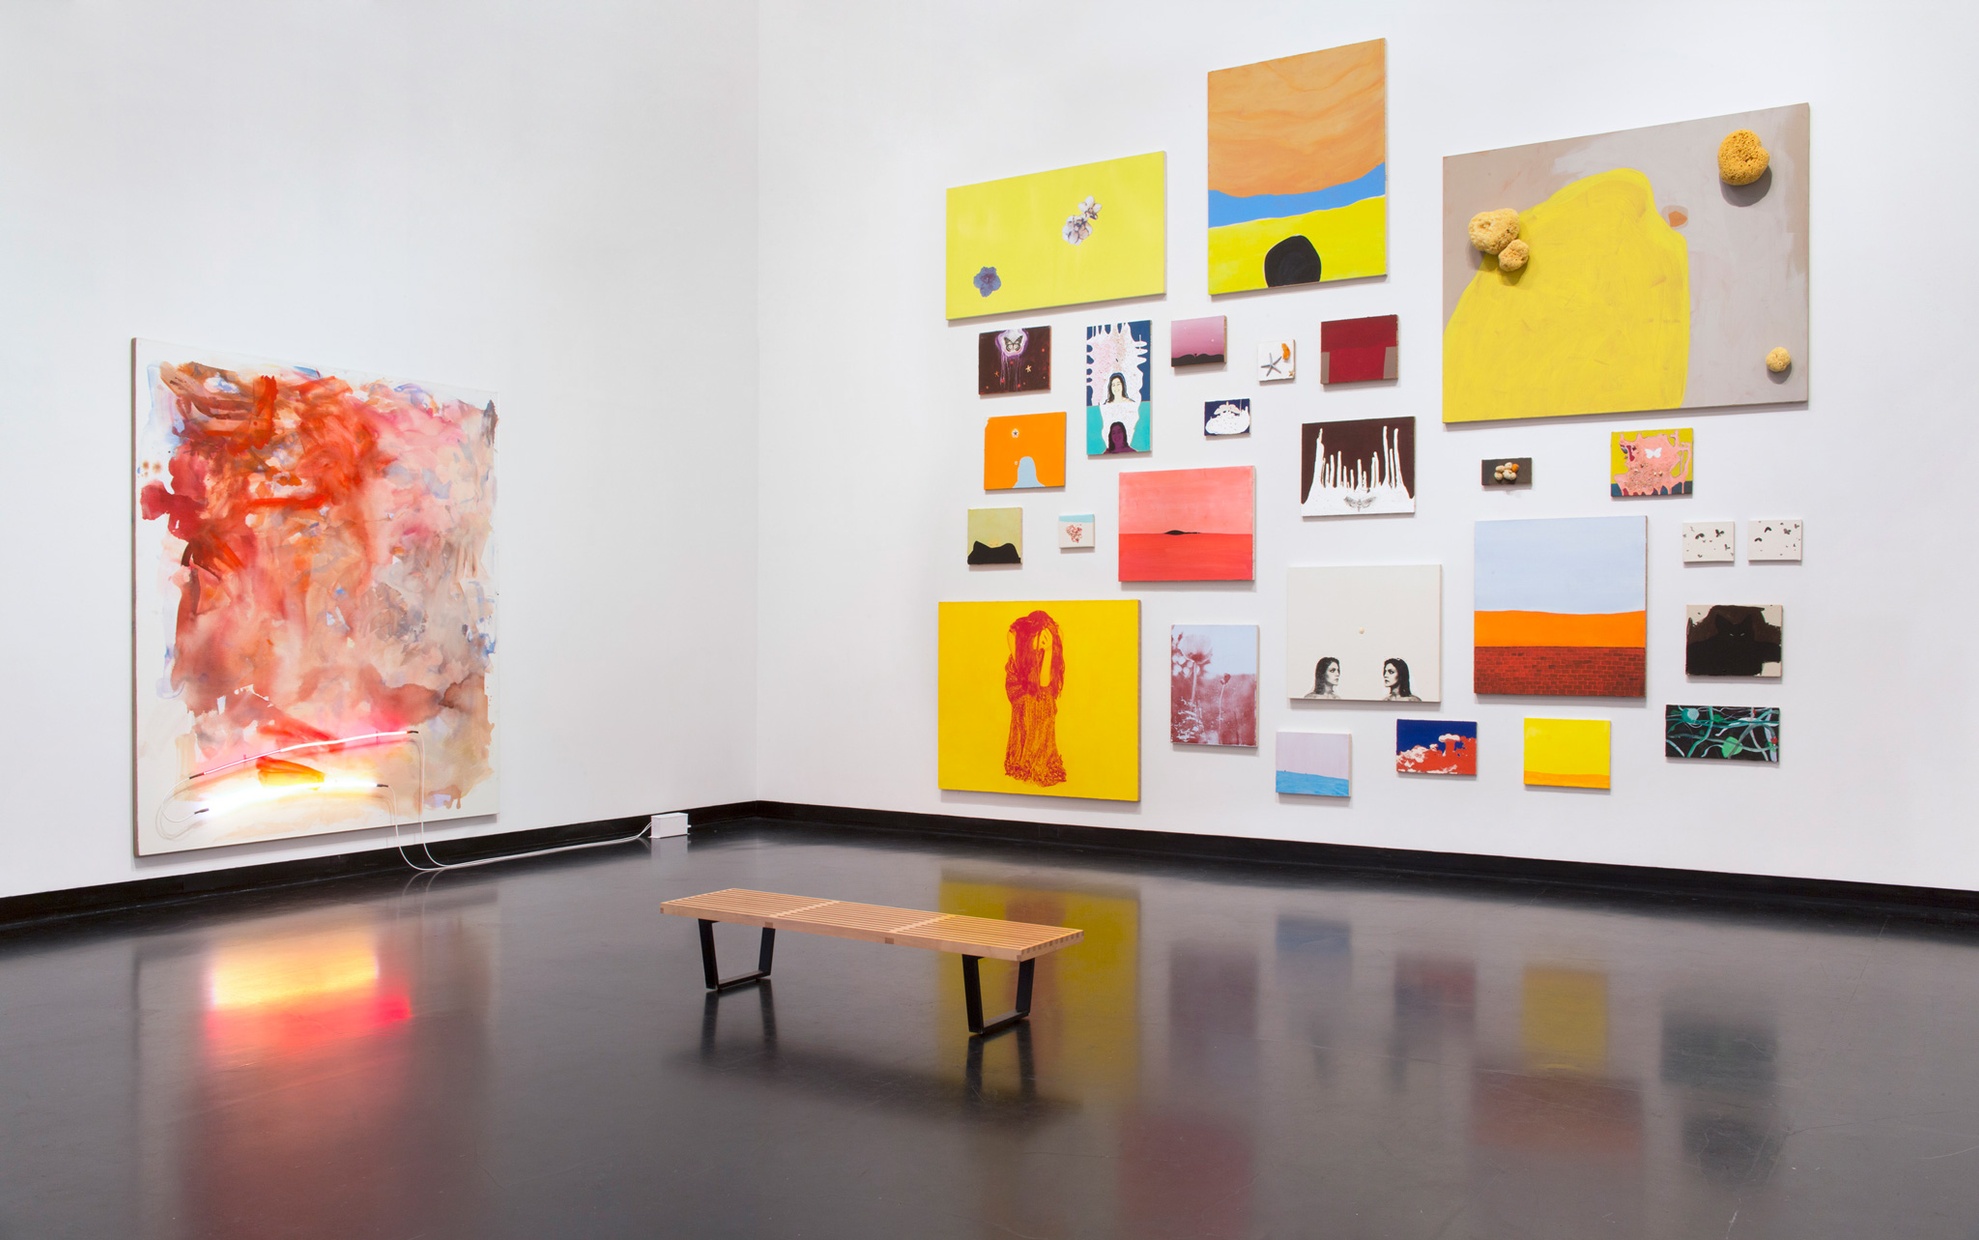 Numerous colorful, abstract paintings arranged on a white wall adjacent to a large, abstract red painting with a yellow neon tube attached near the bottom.